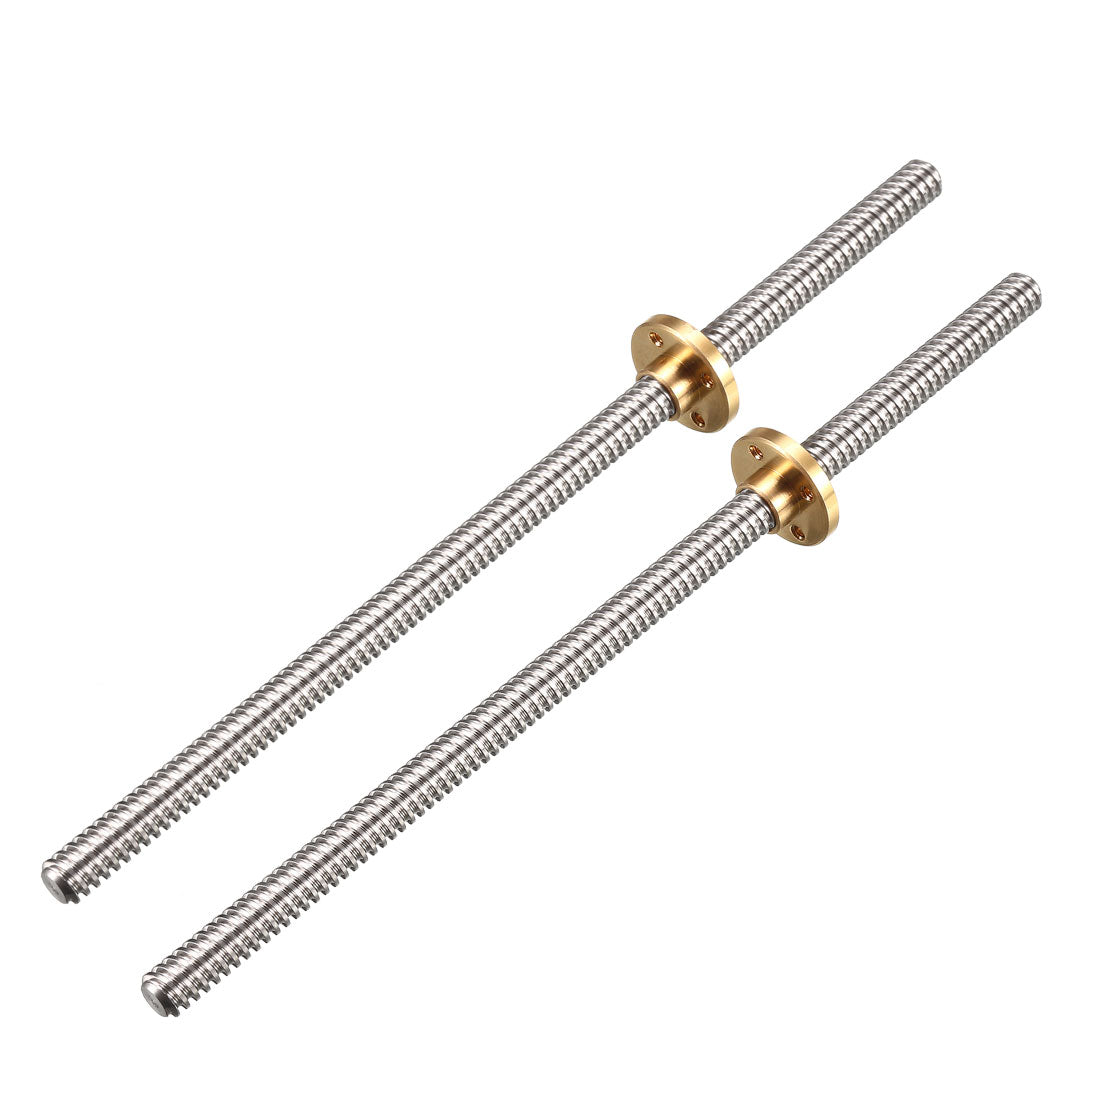 uxcell Uxcell 2PCS 200mm T8 Pitch 2mm Lead 4mm Lead Screw Rod with Copper Nut for 3D Printer